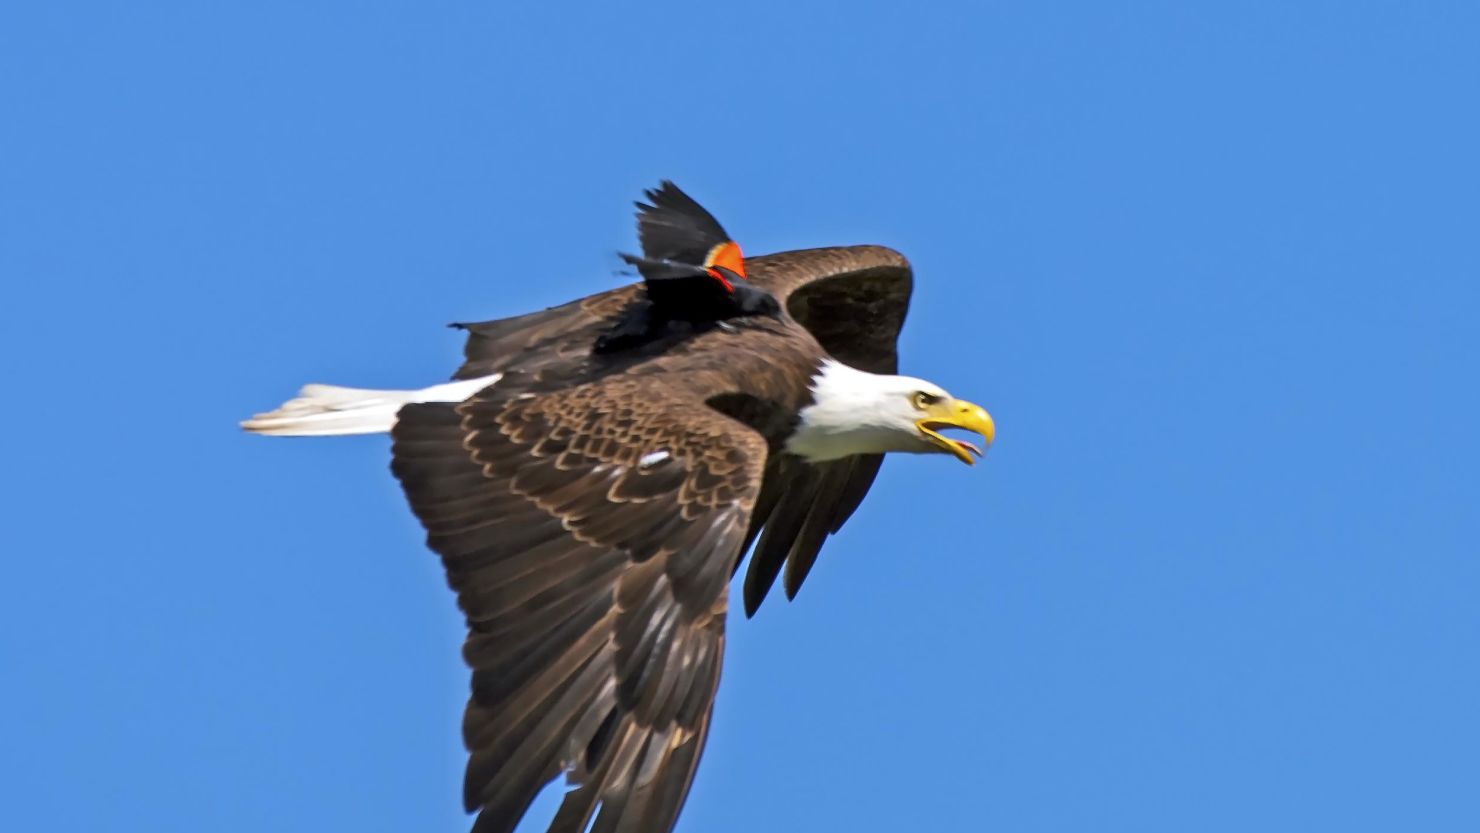 A blackbird hopped on the back of a bald eagle, but it turns out